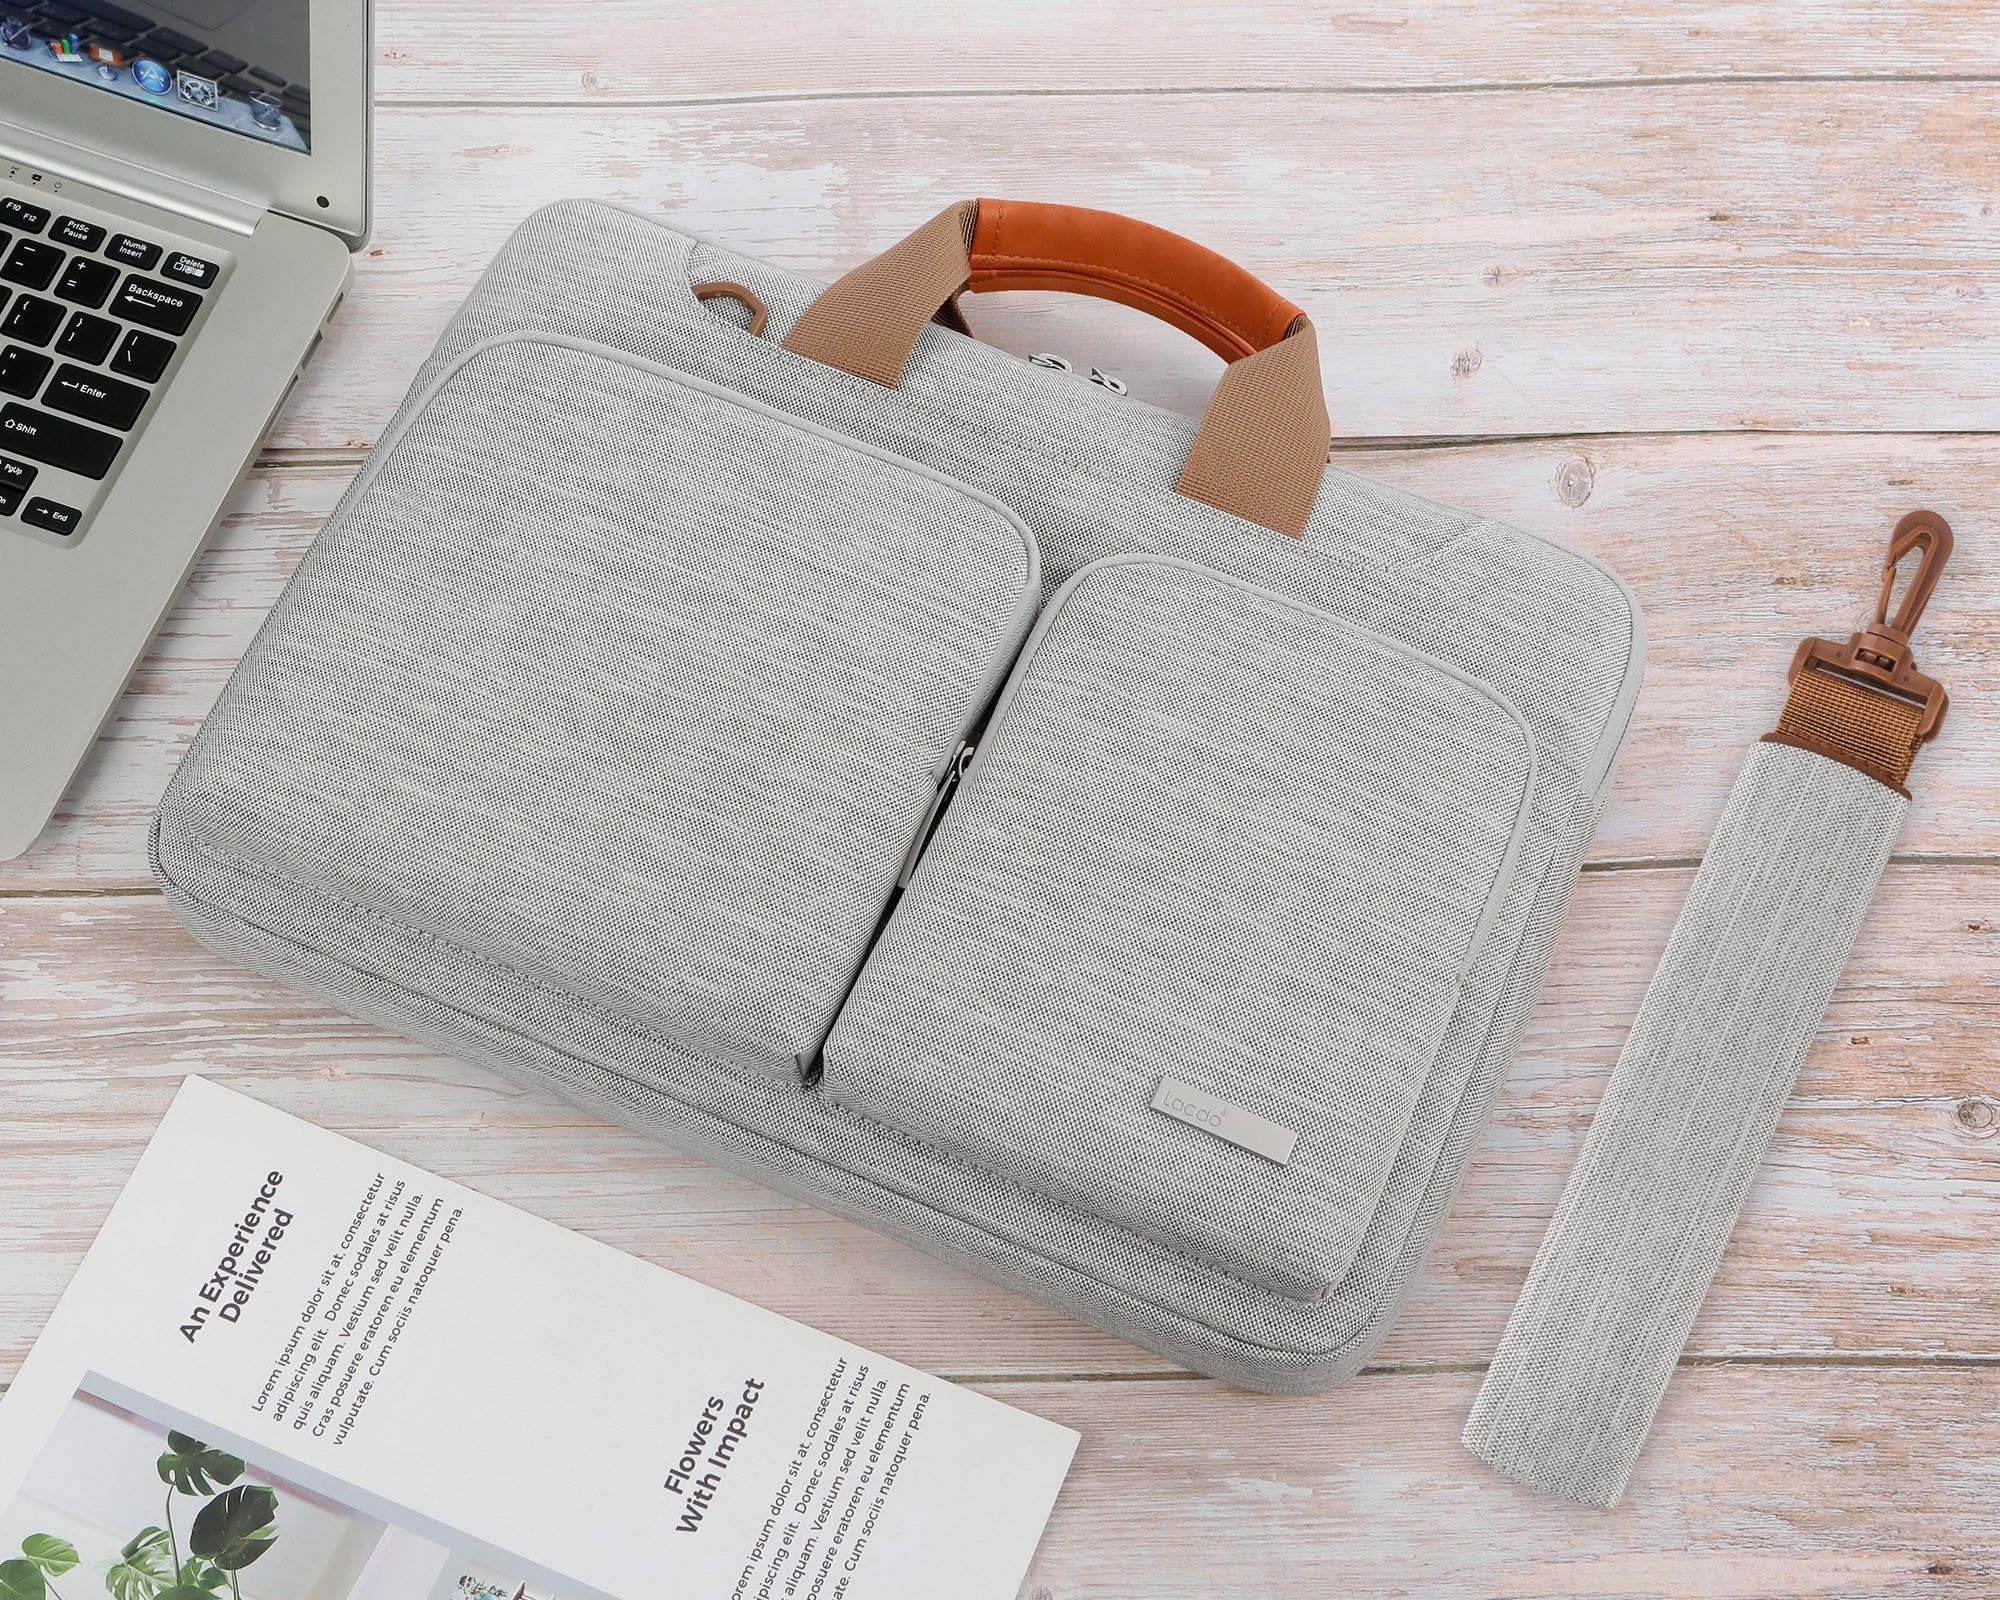 Best Bags For Laptop Sleeves